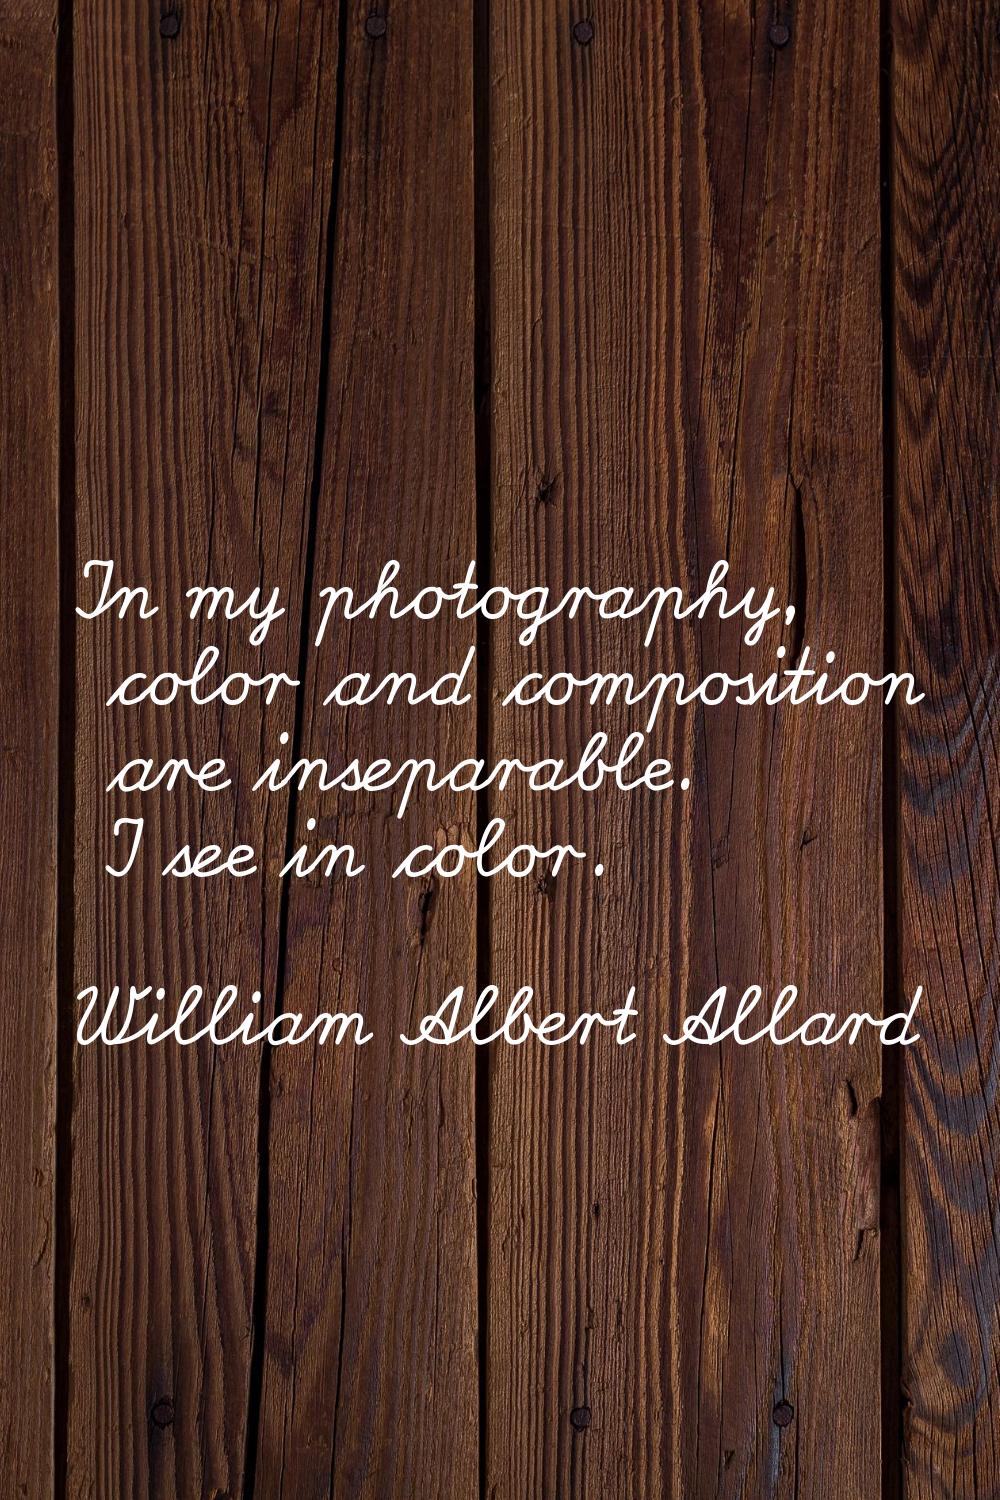 In my photography, color and composition are inseparable. I see in color.